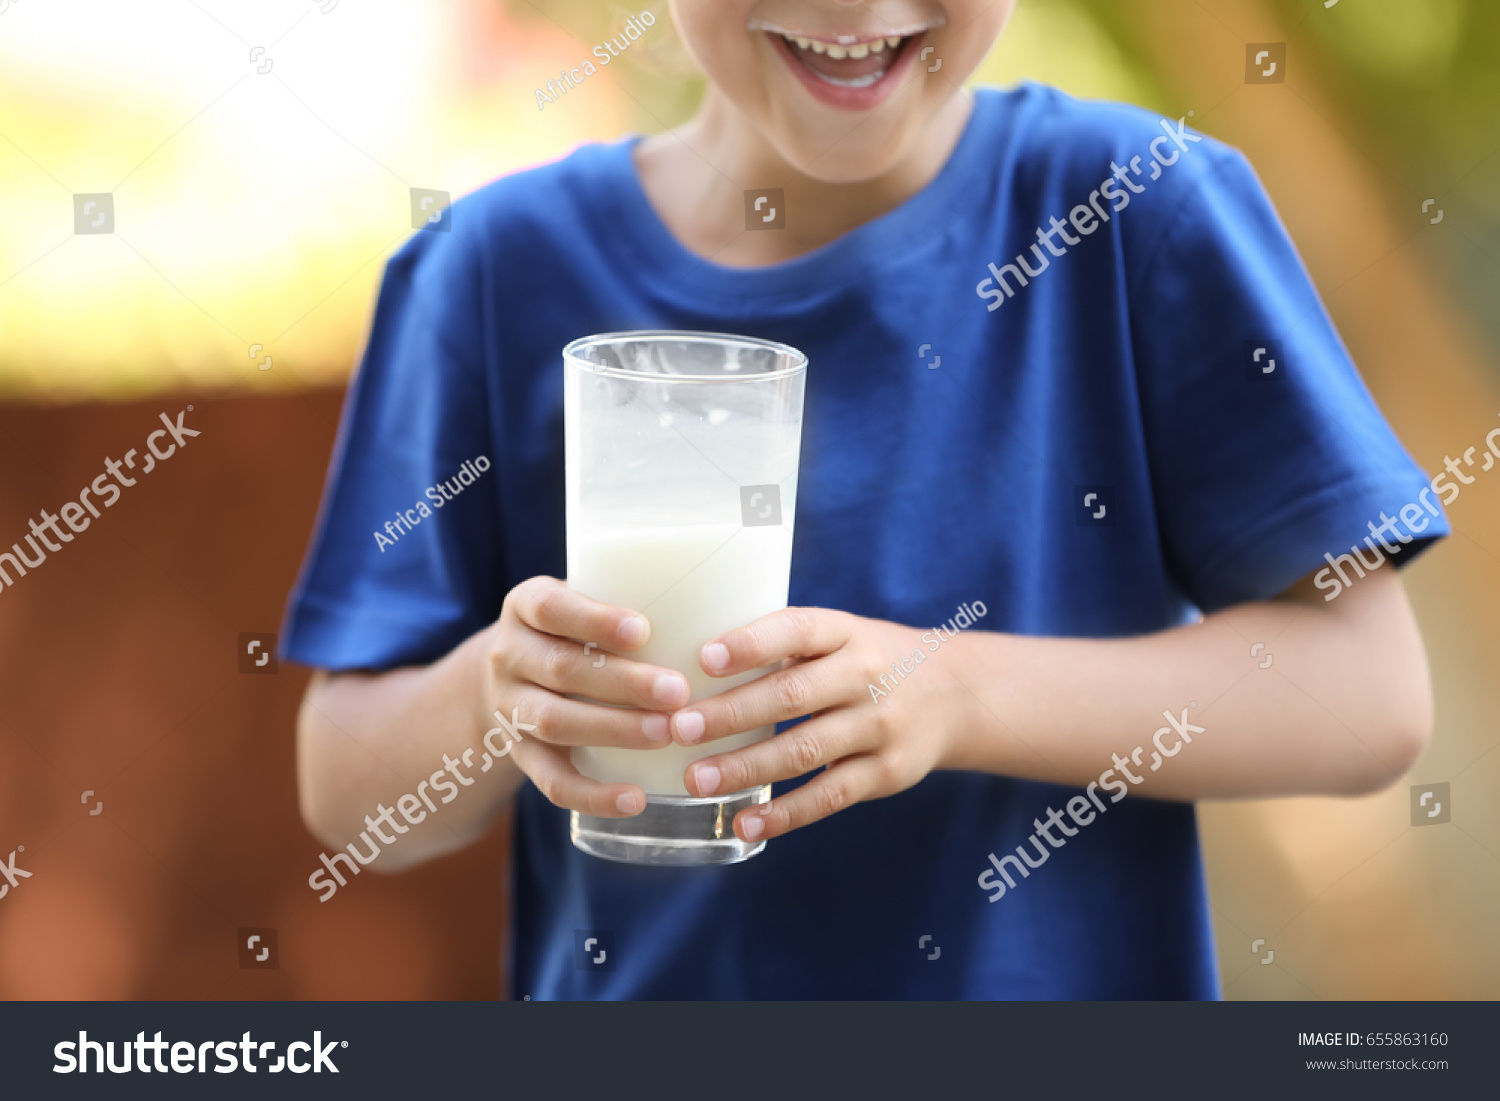 Small boy in blue shirt holding glass of milk, close up #655863160